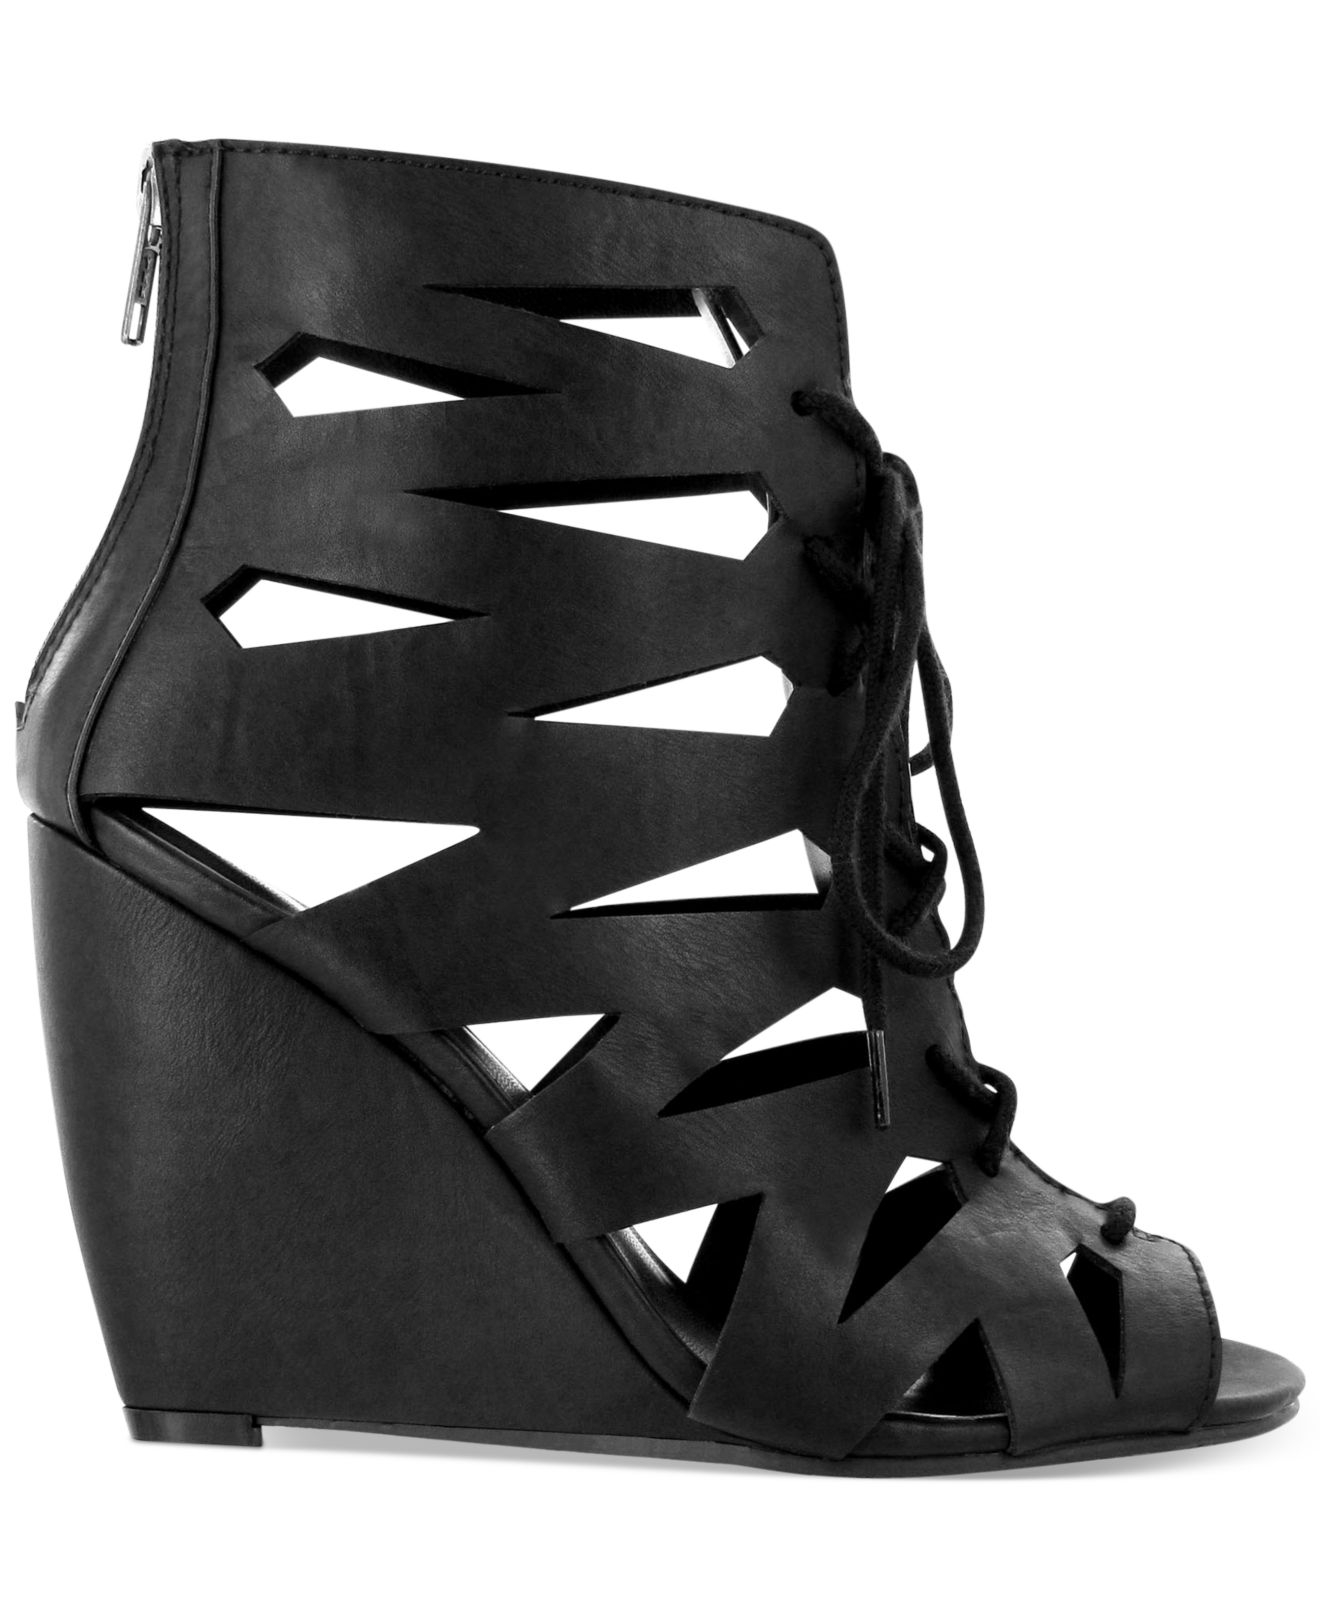 MIA Juna Caged Lace-Up Wedge Sandals in Black - Lyst